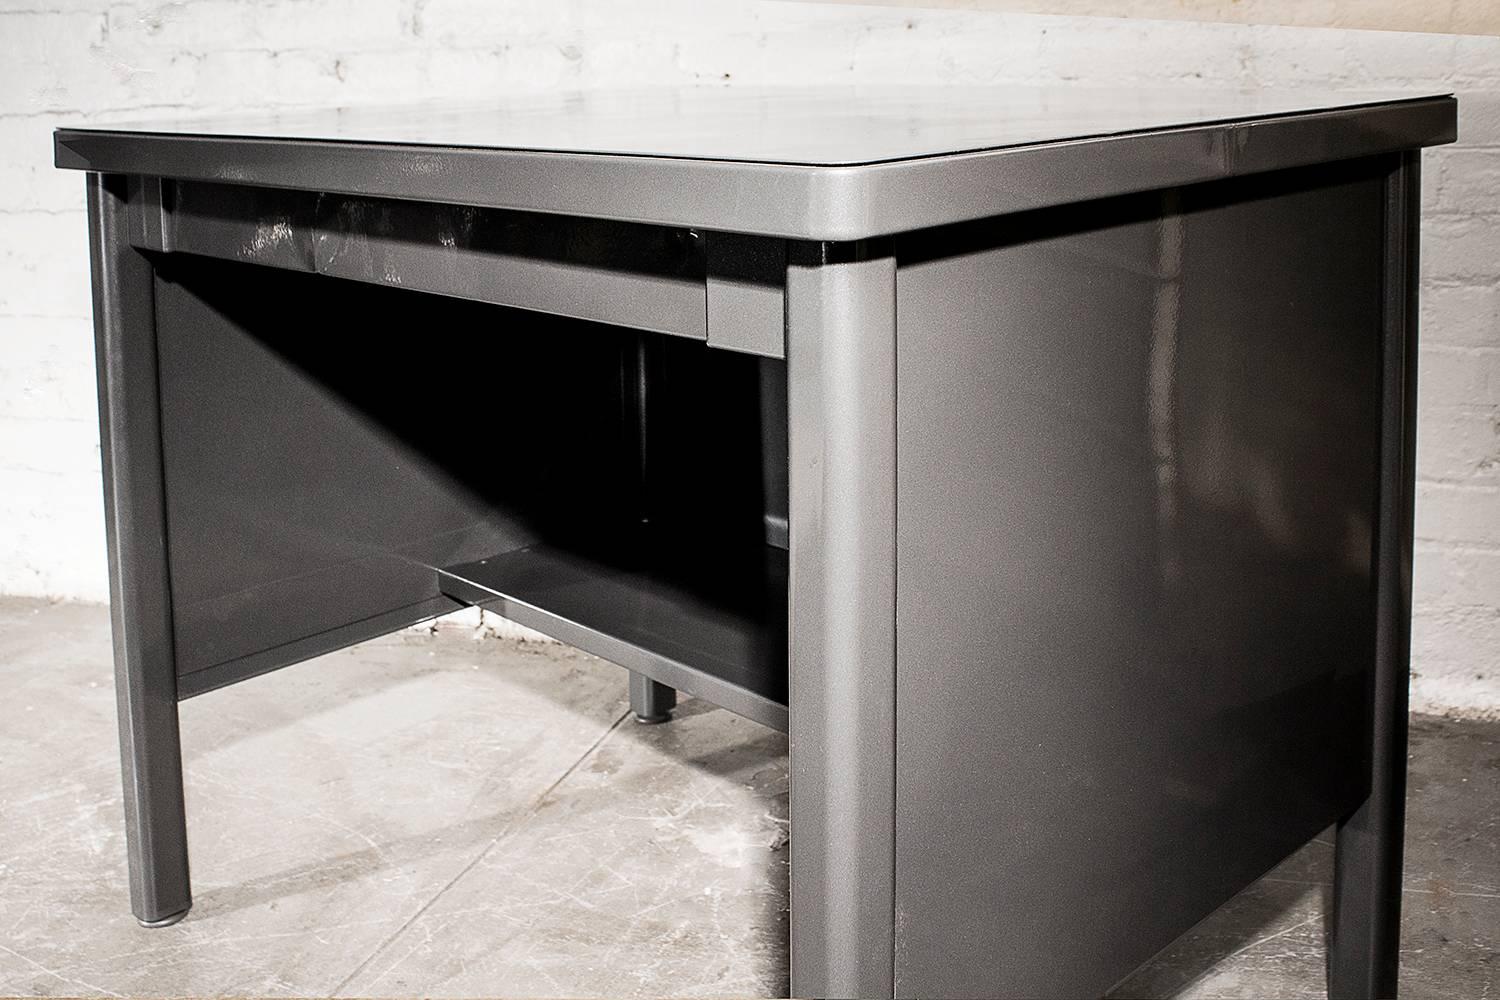 This excellent 1940s Industrial-era piece by the General Fireproofing Co. is a unique cross between a writing desk and work table. The 4-legged base features single utility drawer. Freshly powder-coated in grey. An equally perfect office reception